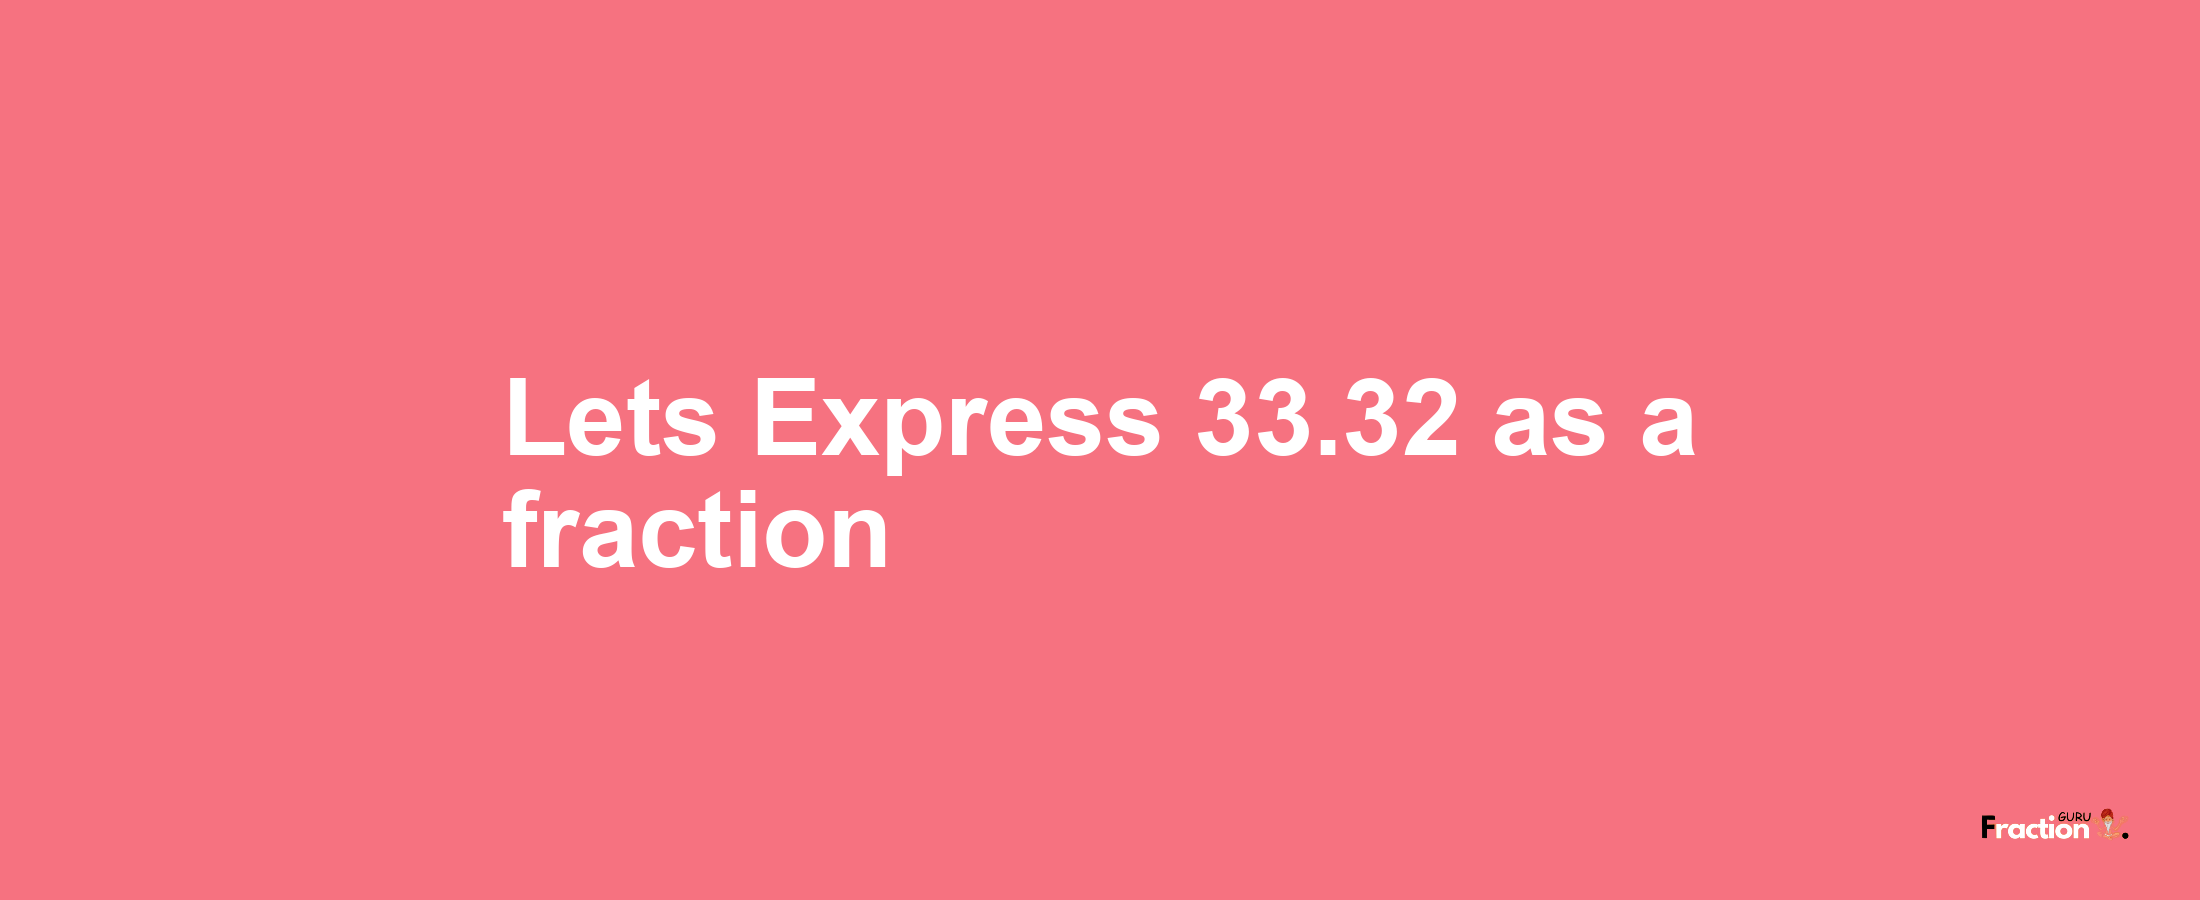 Lets Express 33.32 as afraction